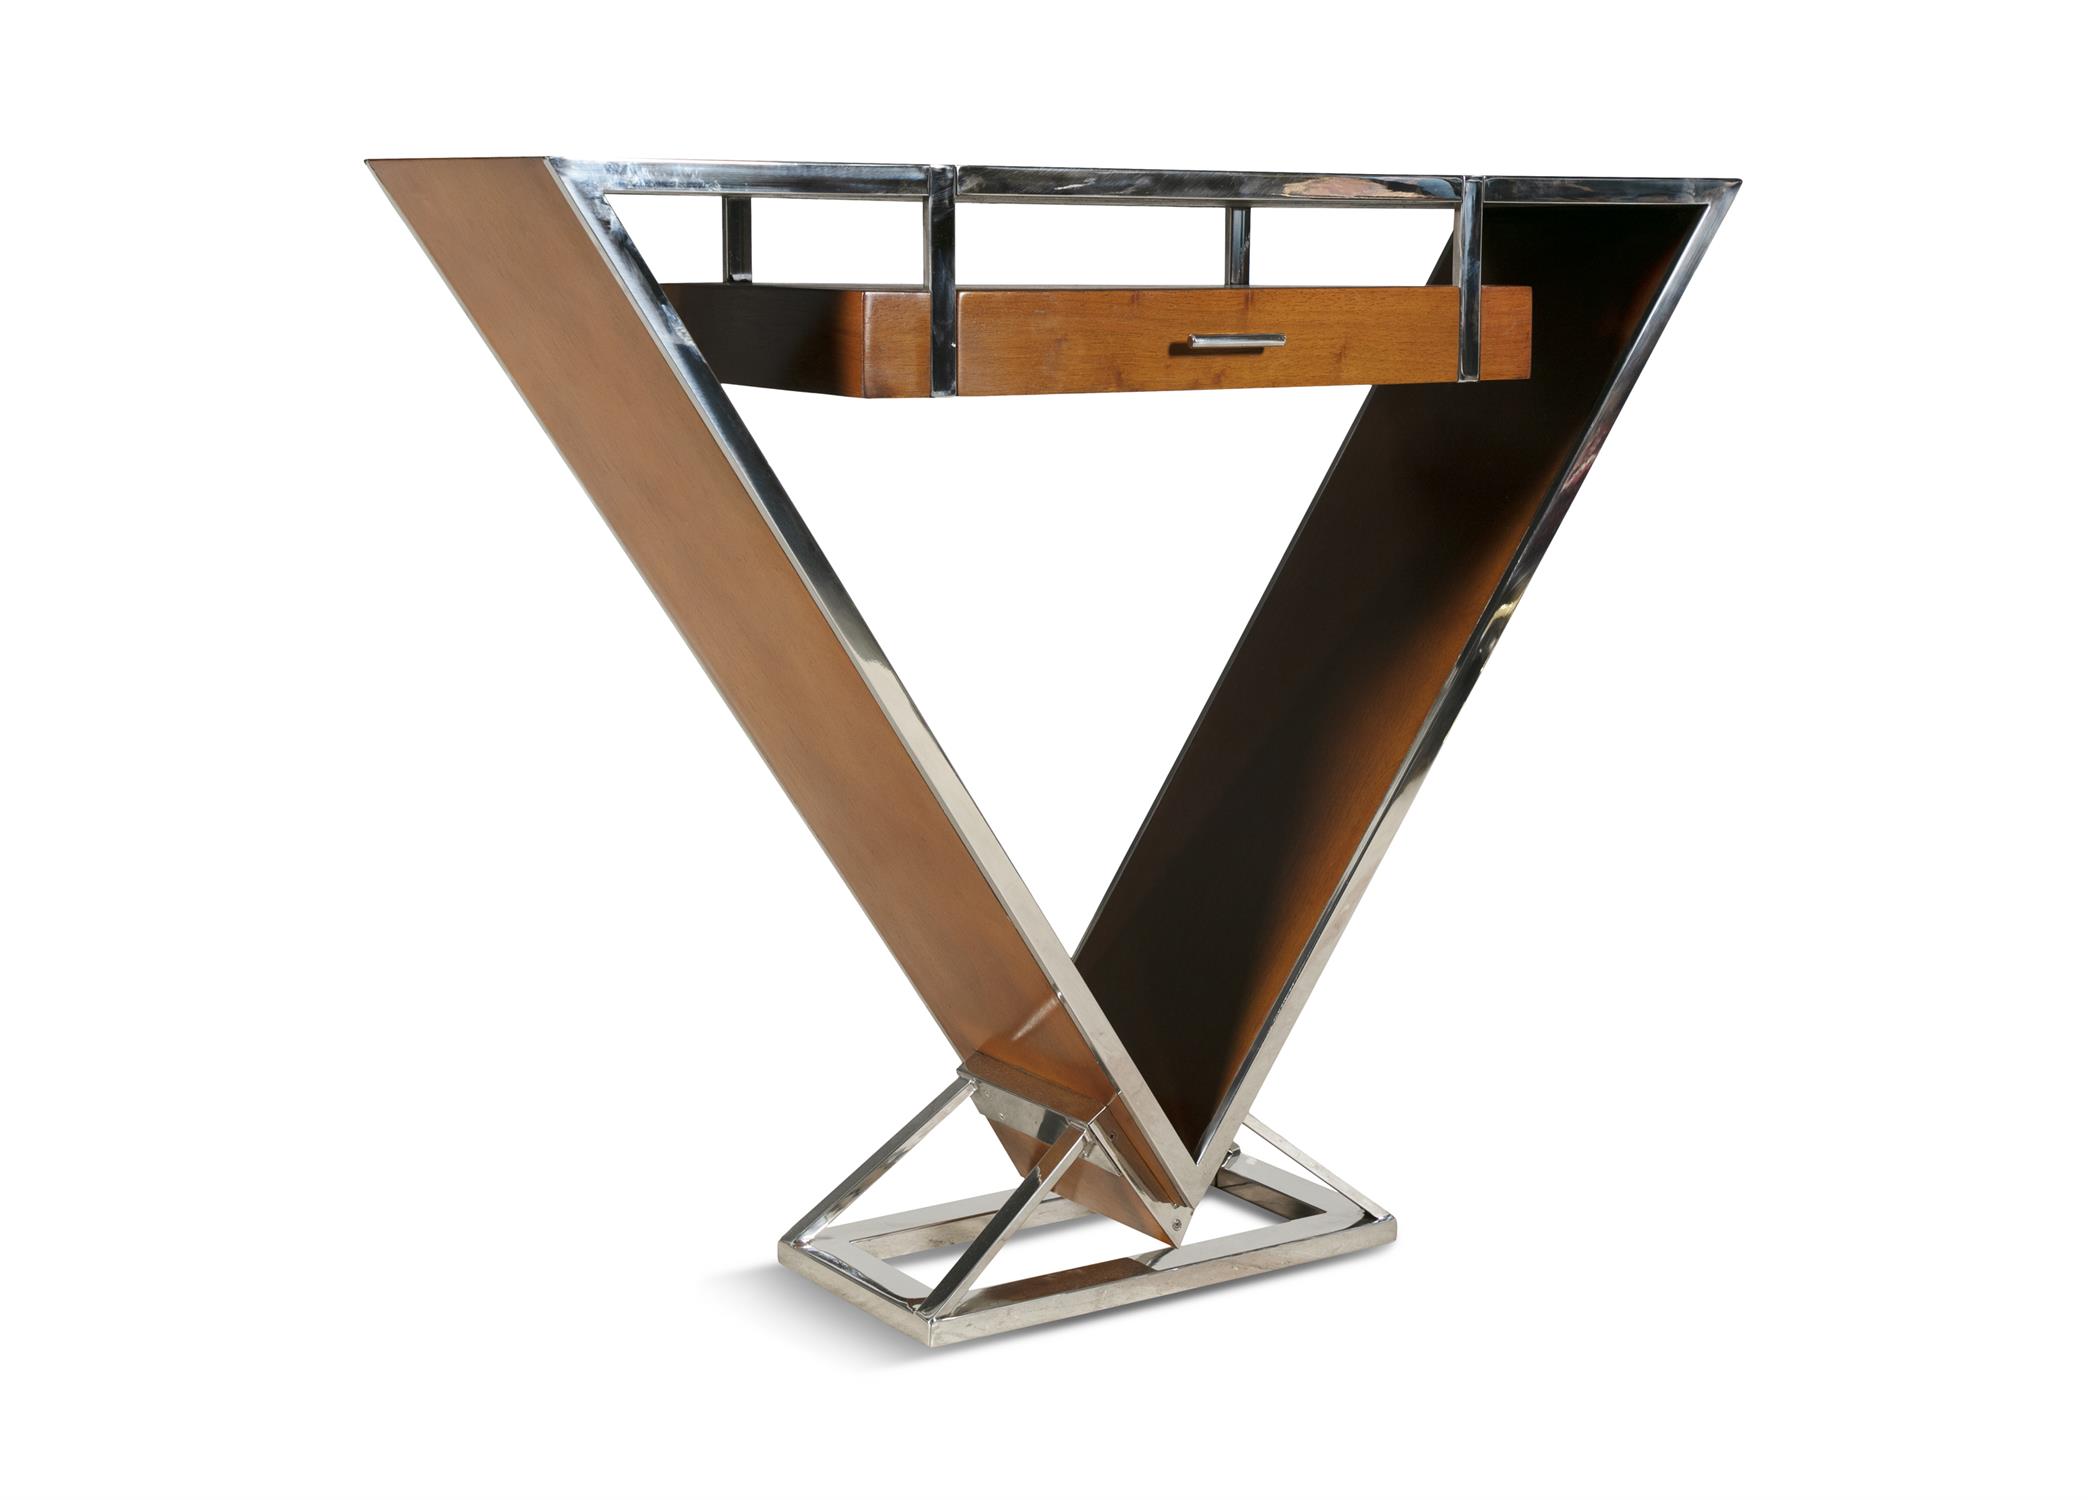 CONSOLE A triangular shaped console with a single drawer. Chrome and teak. France. - Image 3 of 7